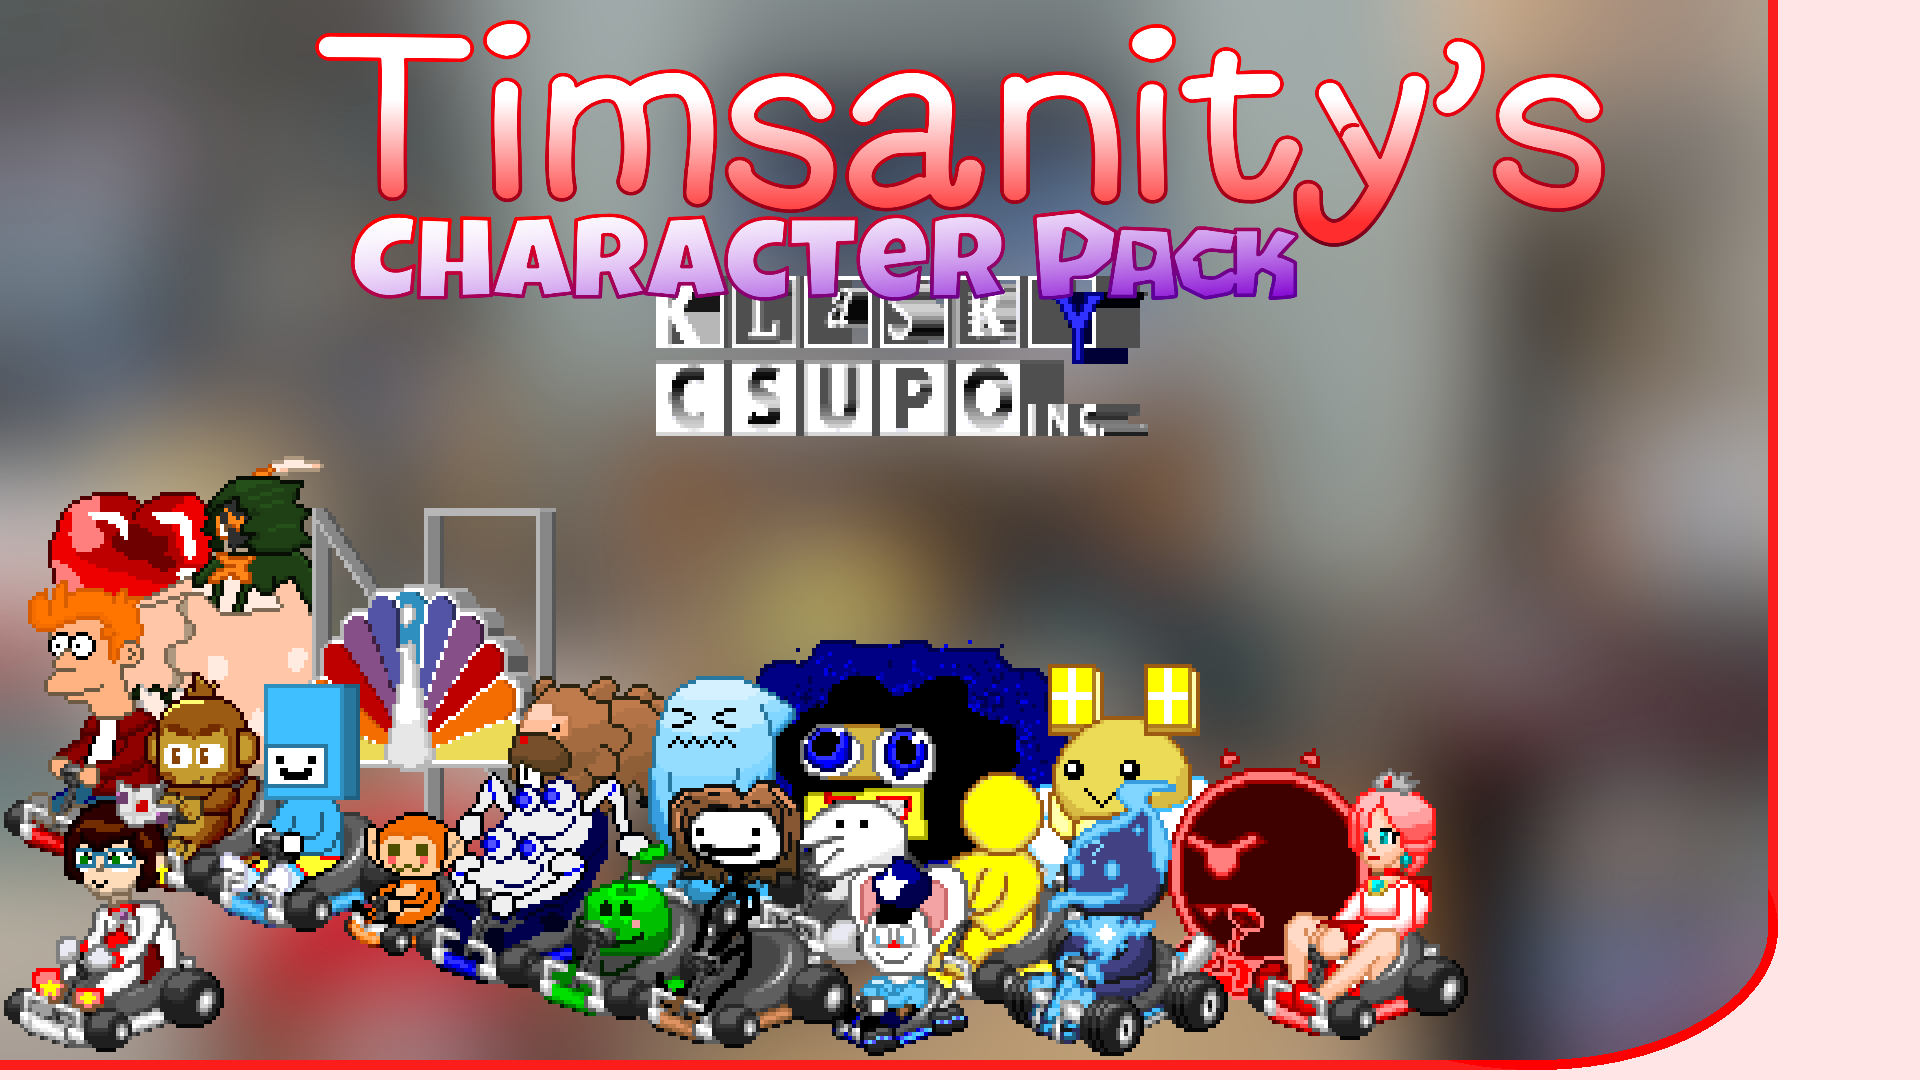 timsanitycharacterpack2.9.png